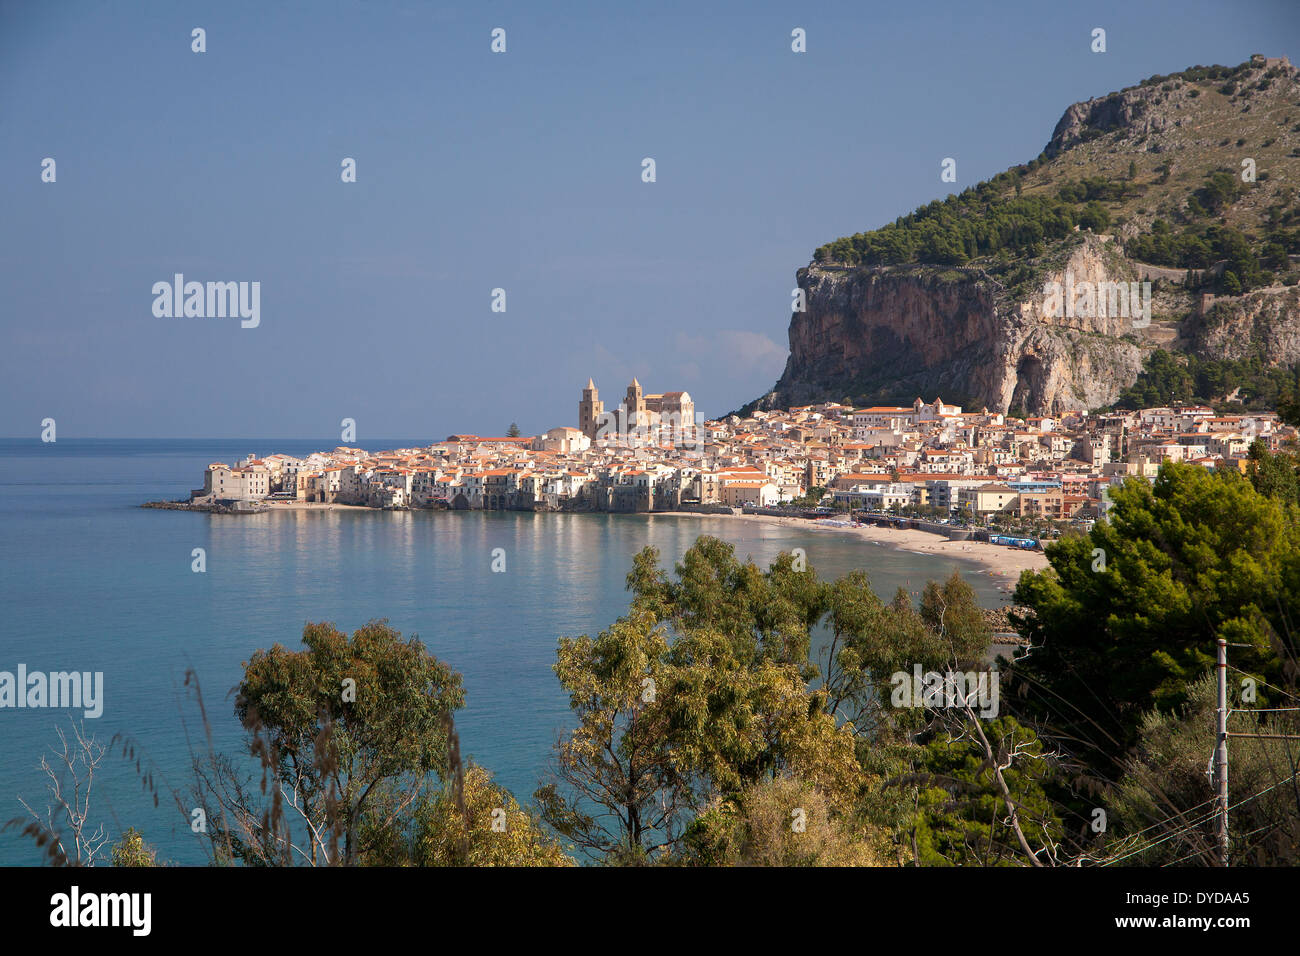 Cefalu mountains and bay, Sicily. Stock Photo